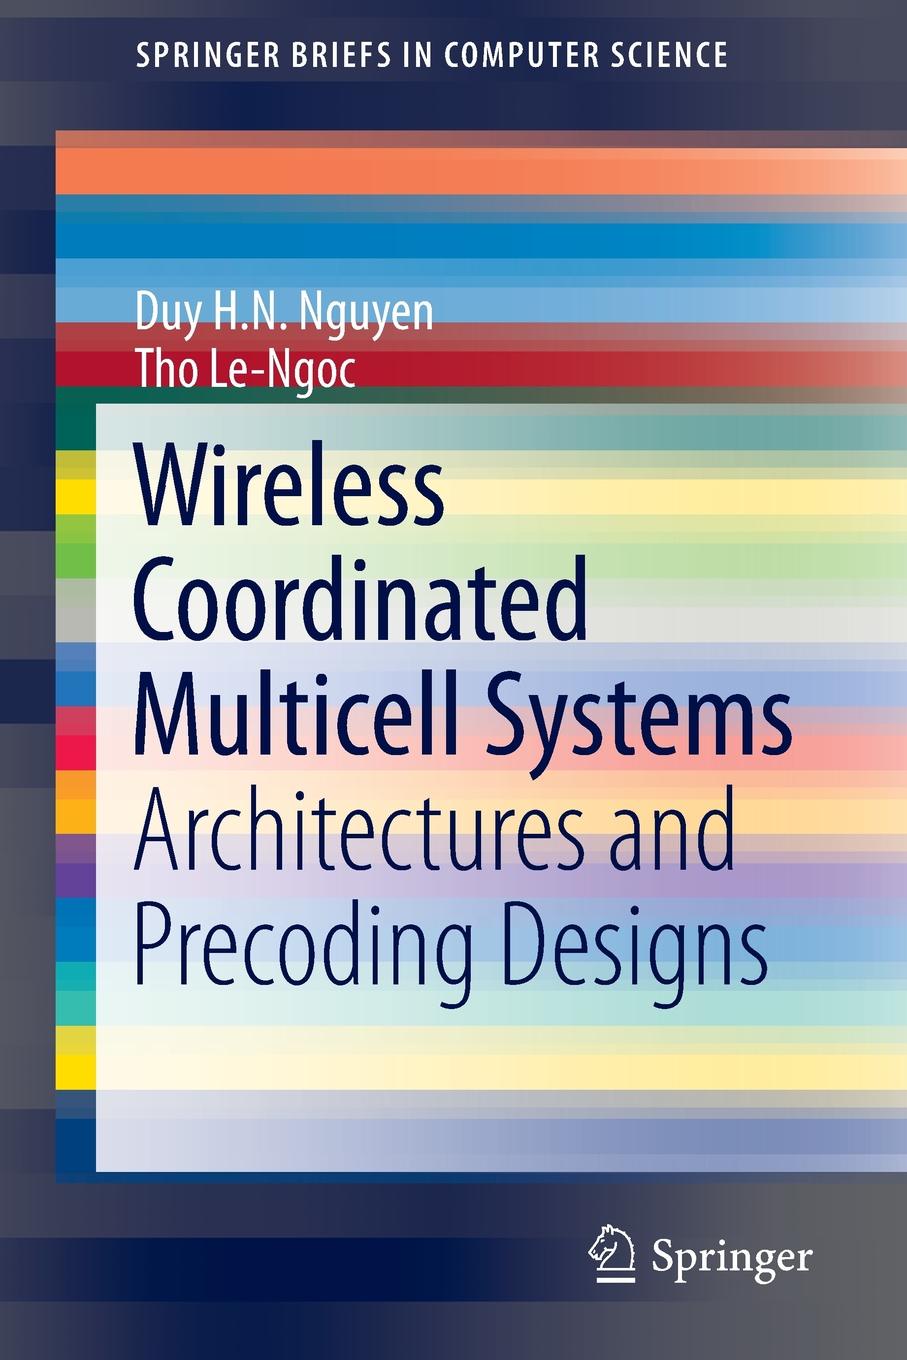 Wireless Coordinated Multicell Systems. Architectures and Precoding Designs